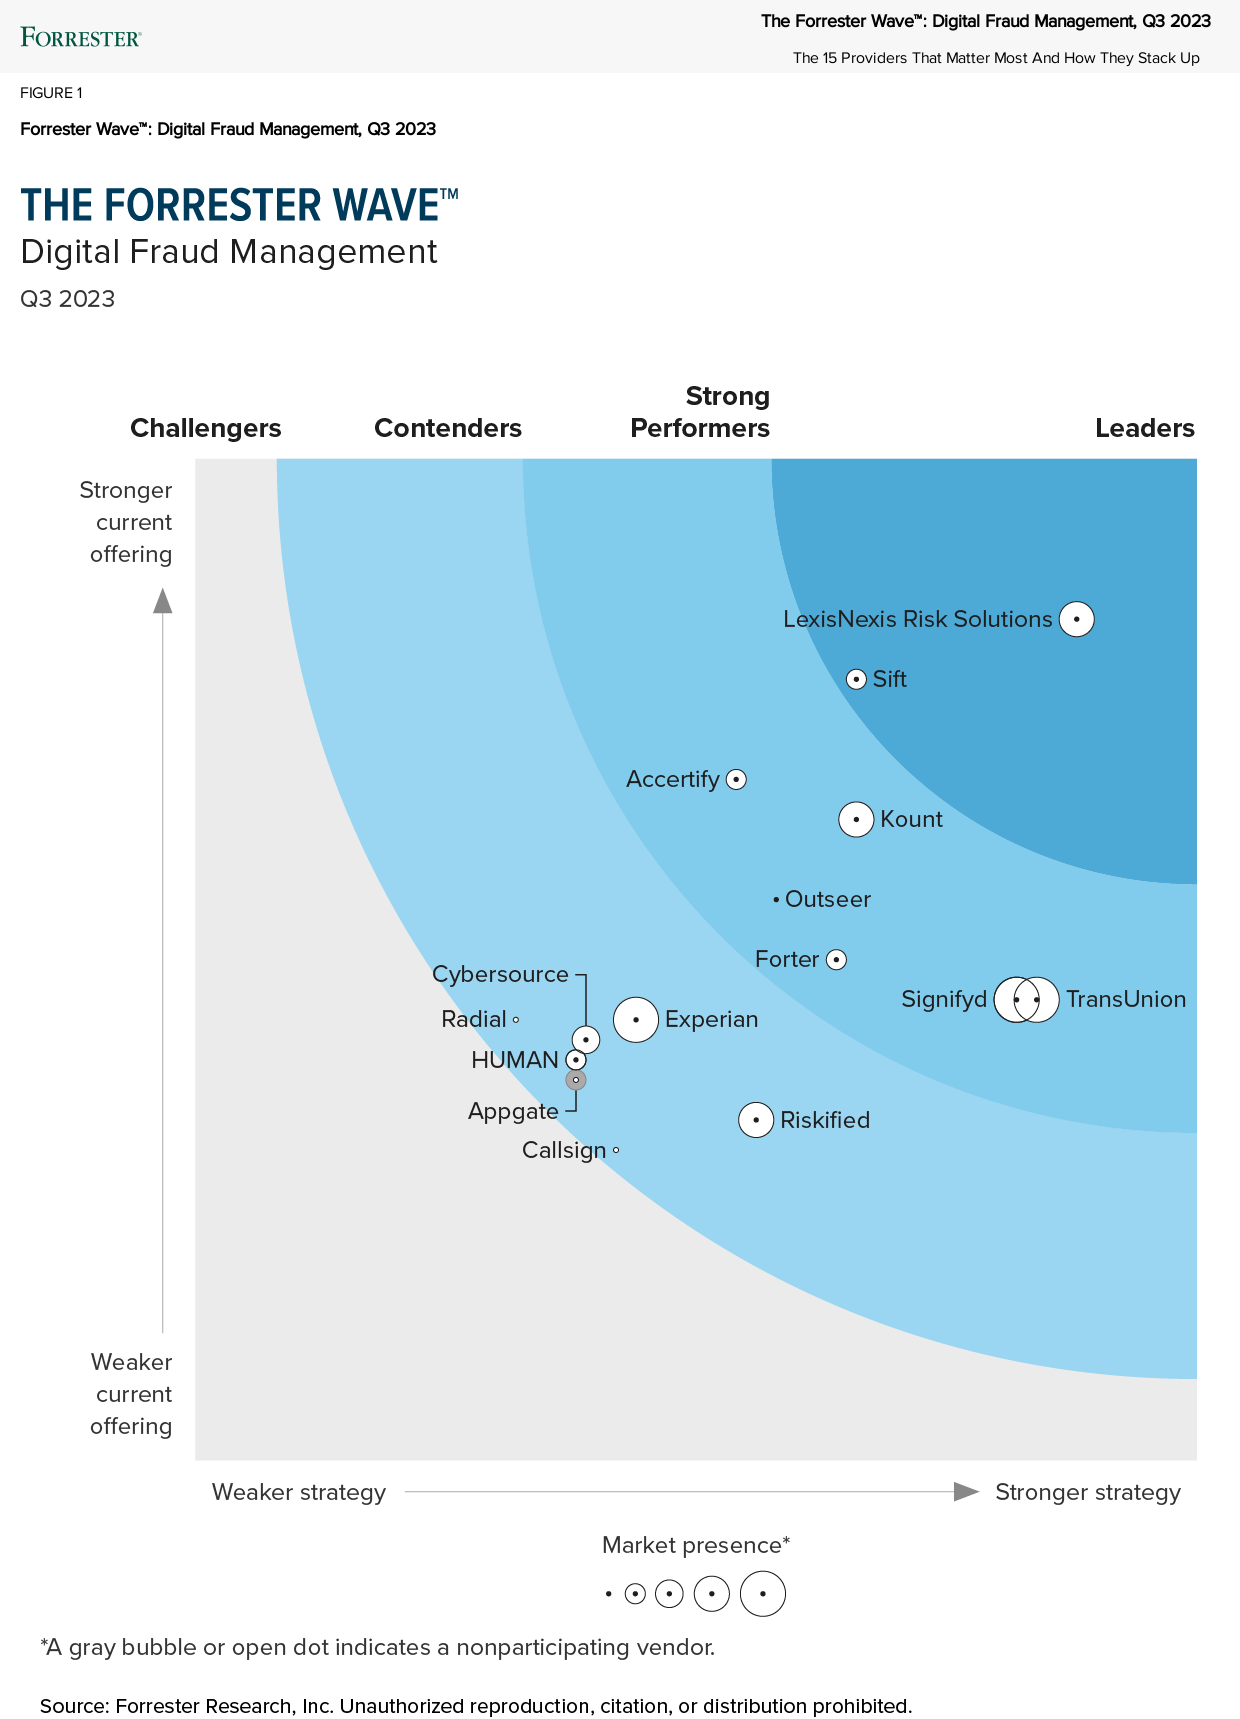 Forrester Research Ranks LexisNexis® Risk Solutions as a Leader